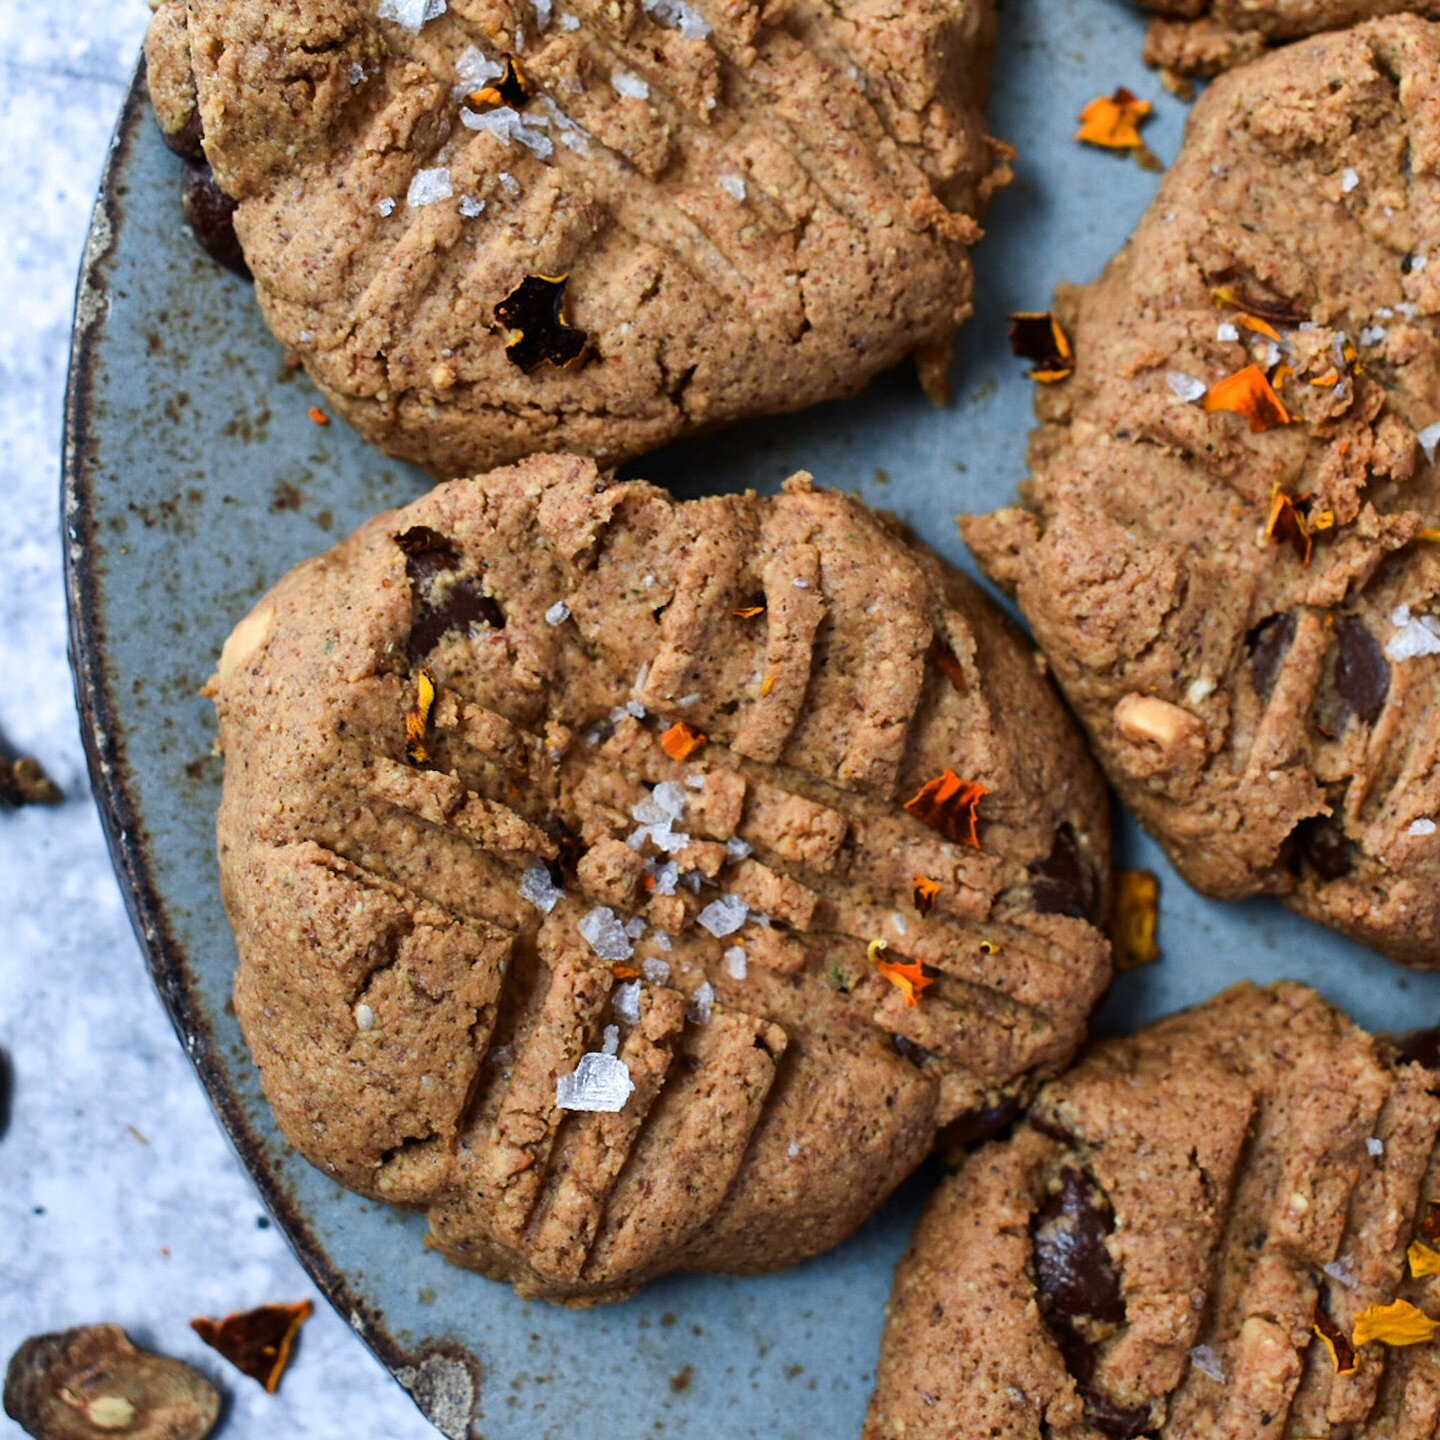 These dandelion root cookies by @themedicinecircle are not only super tasty and beautiful, but super nutritious and beneficial for cleansing through the digestive system too.  Perfect for this time of year when our systems are sluggish from lack of m